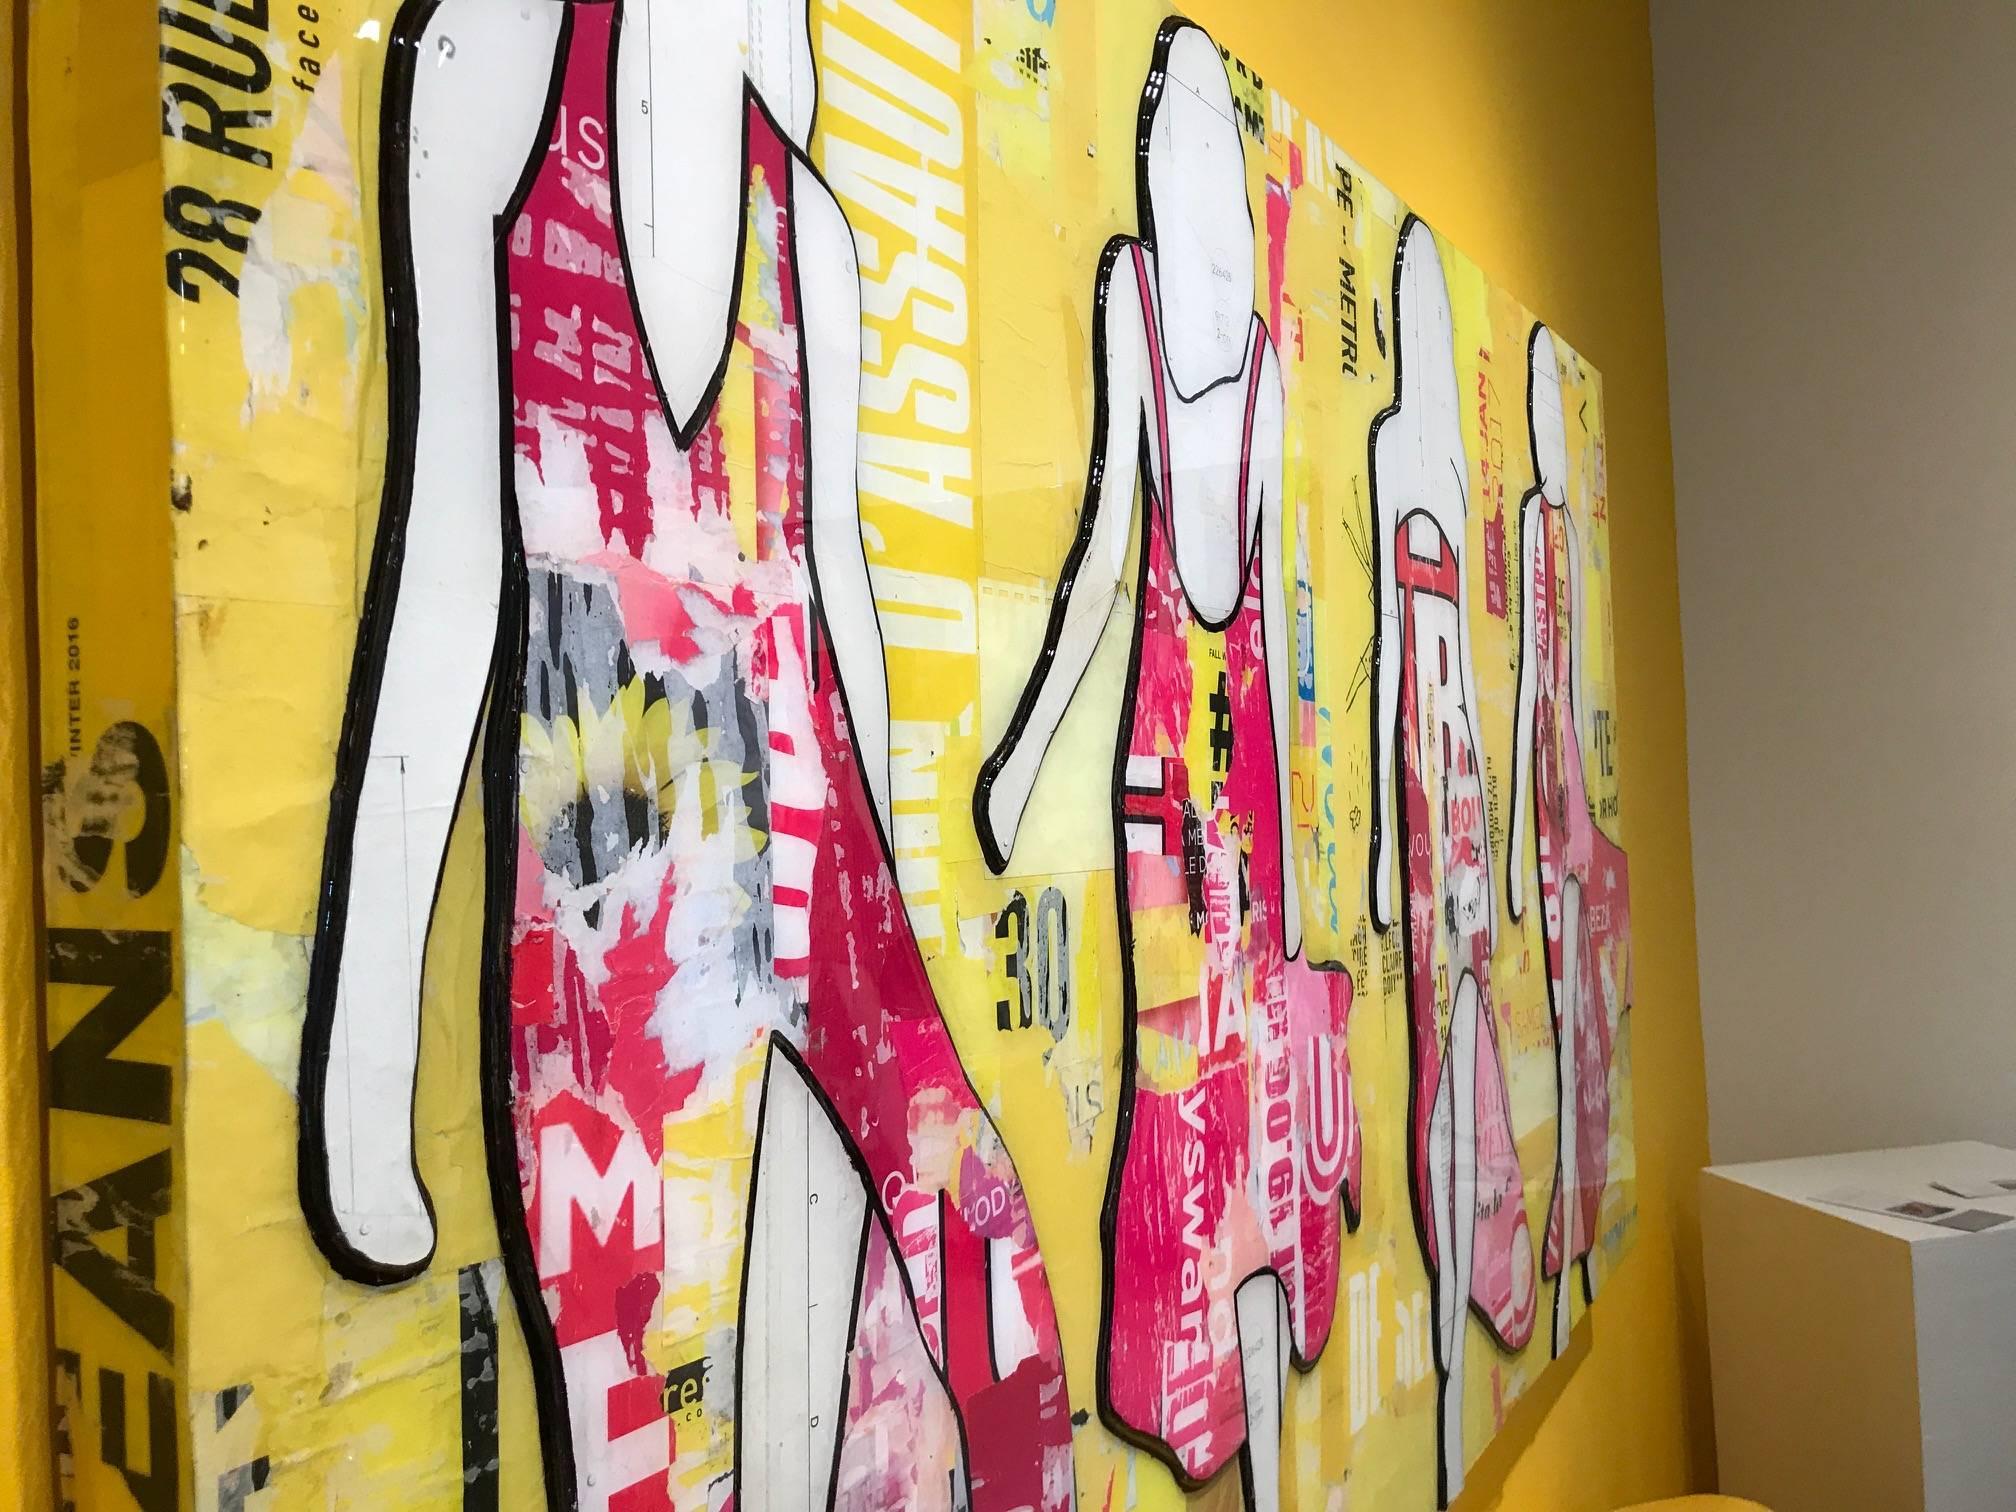 JANE MAXWELL
Pink and Yellow Girls,
Mixed Media with Resin on Panel
40 × 70 in

Jane Maxwell's current work largely focuses on women, body image and the feminine ideal. Her collages are deeply layered works, combining color, texture and text that